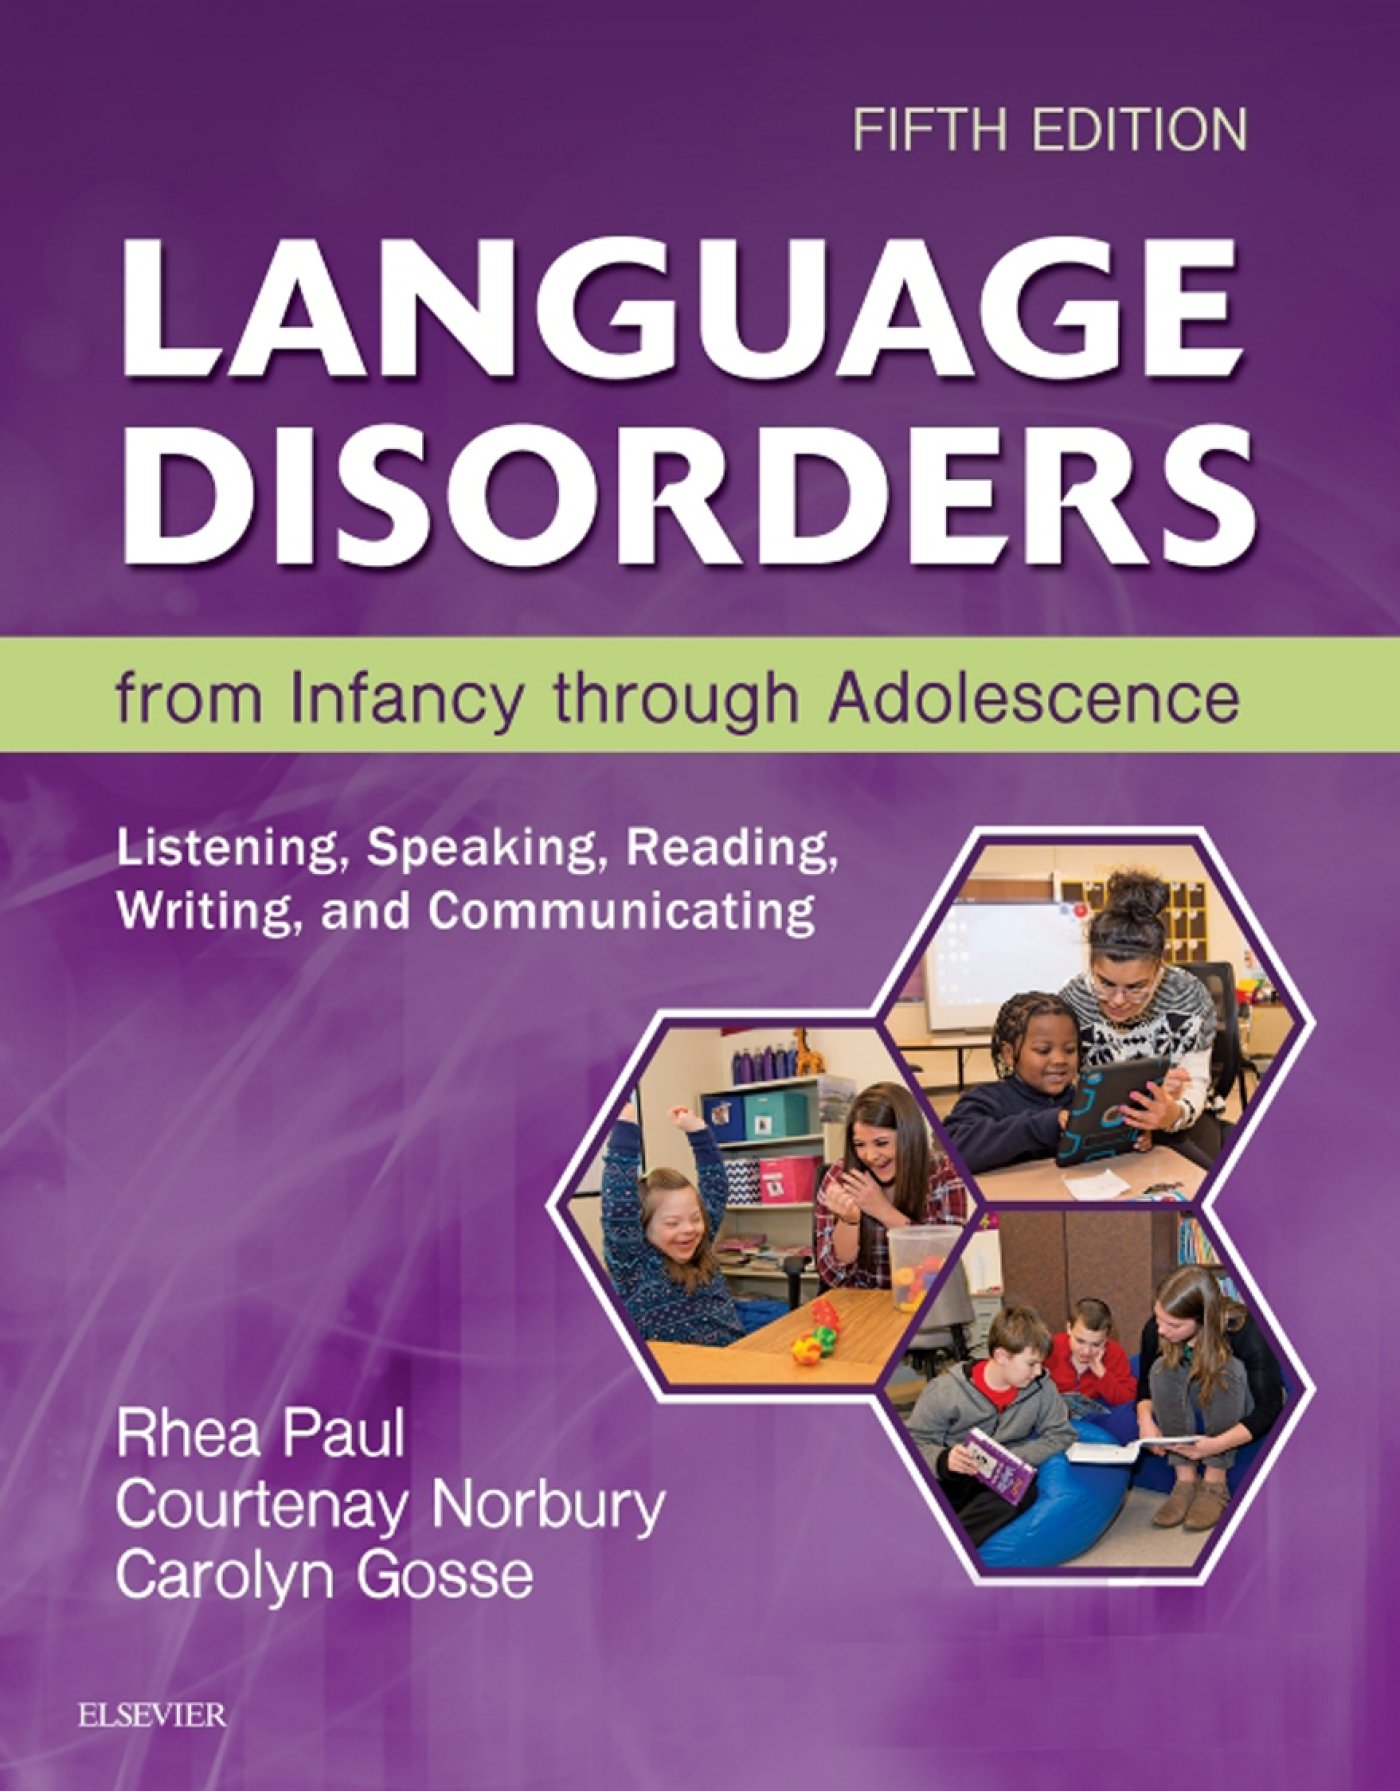 Language Disorders from Infancy Through Adolescence (5th Edition) – eBook PDF